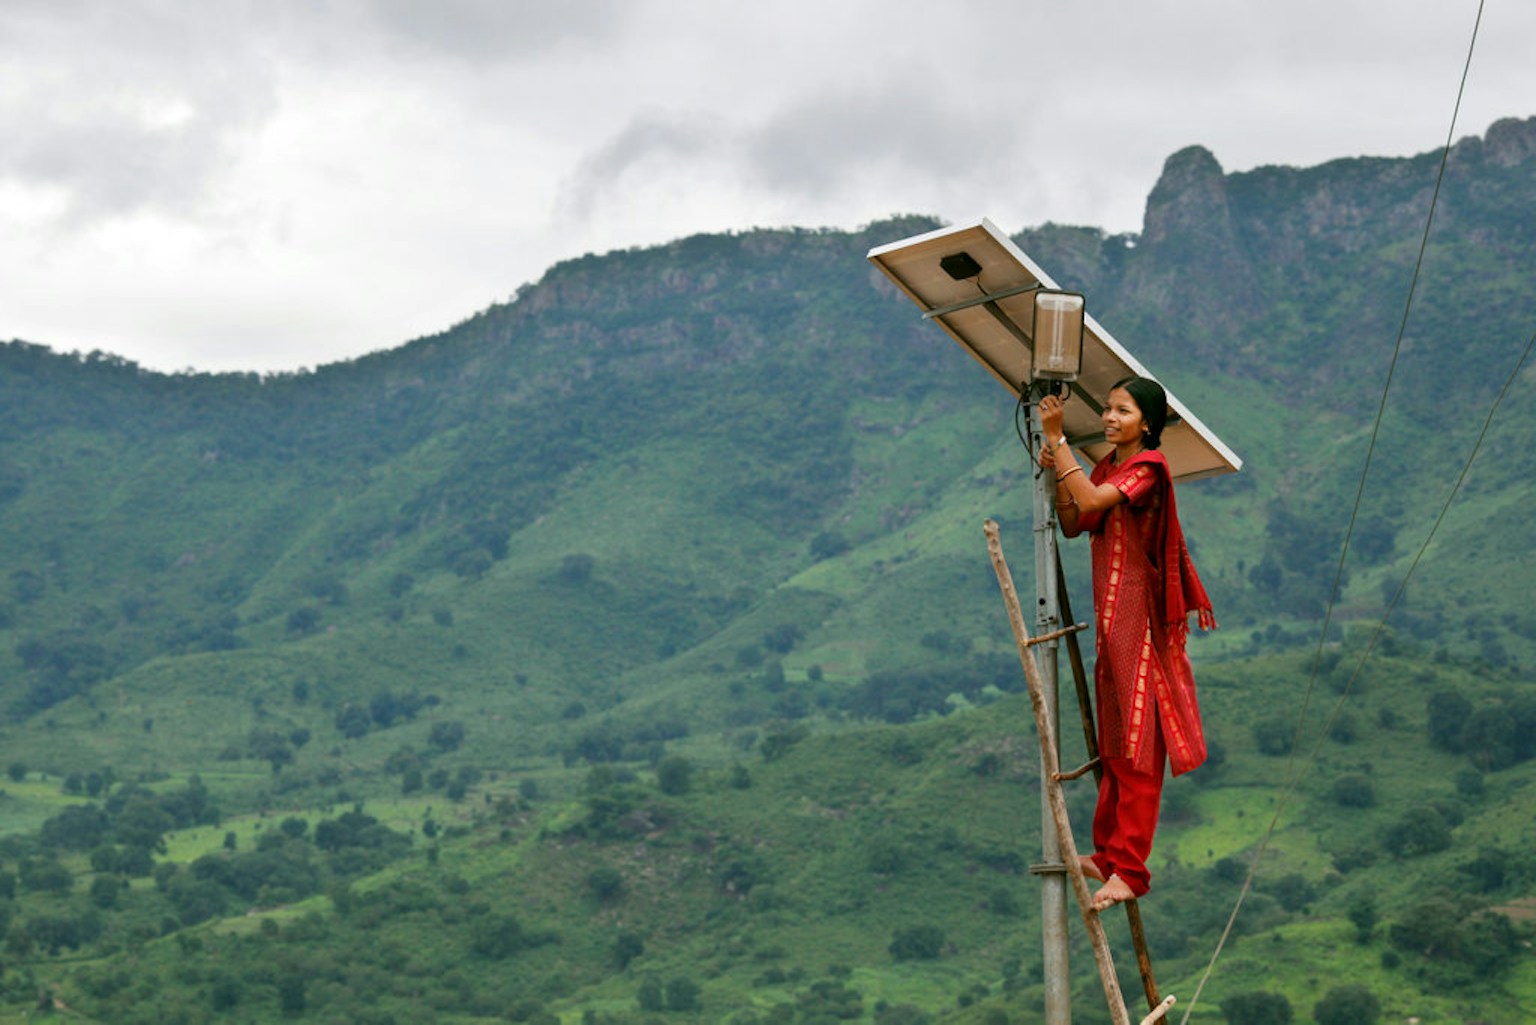 Solar power India - Woman at work